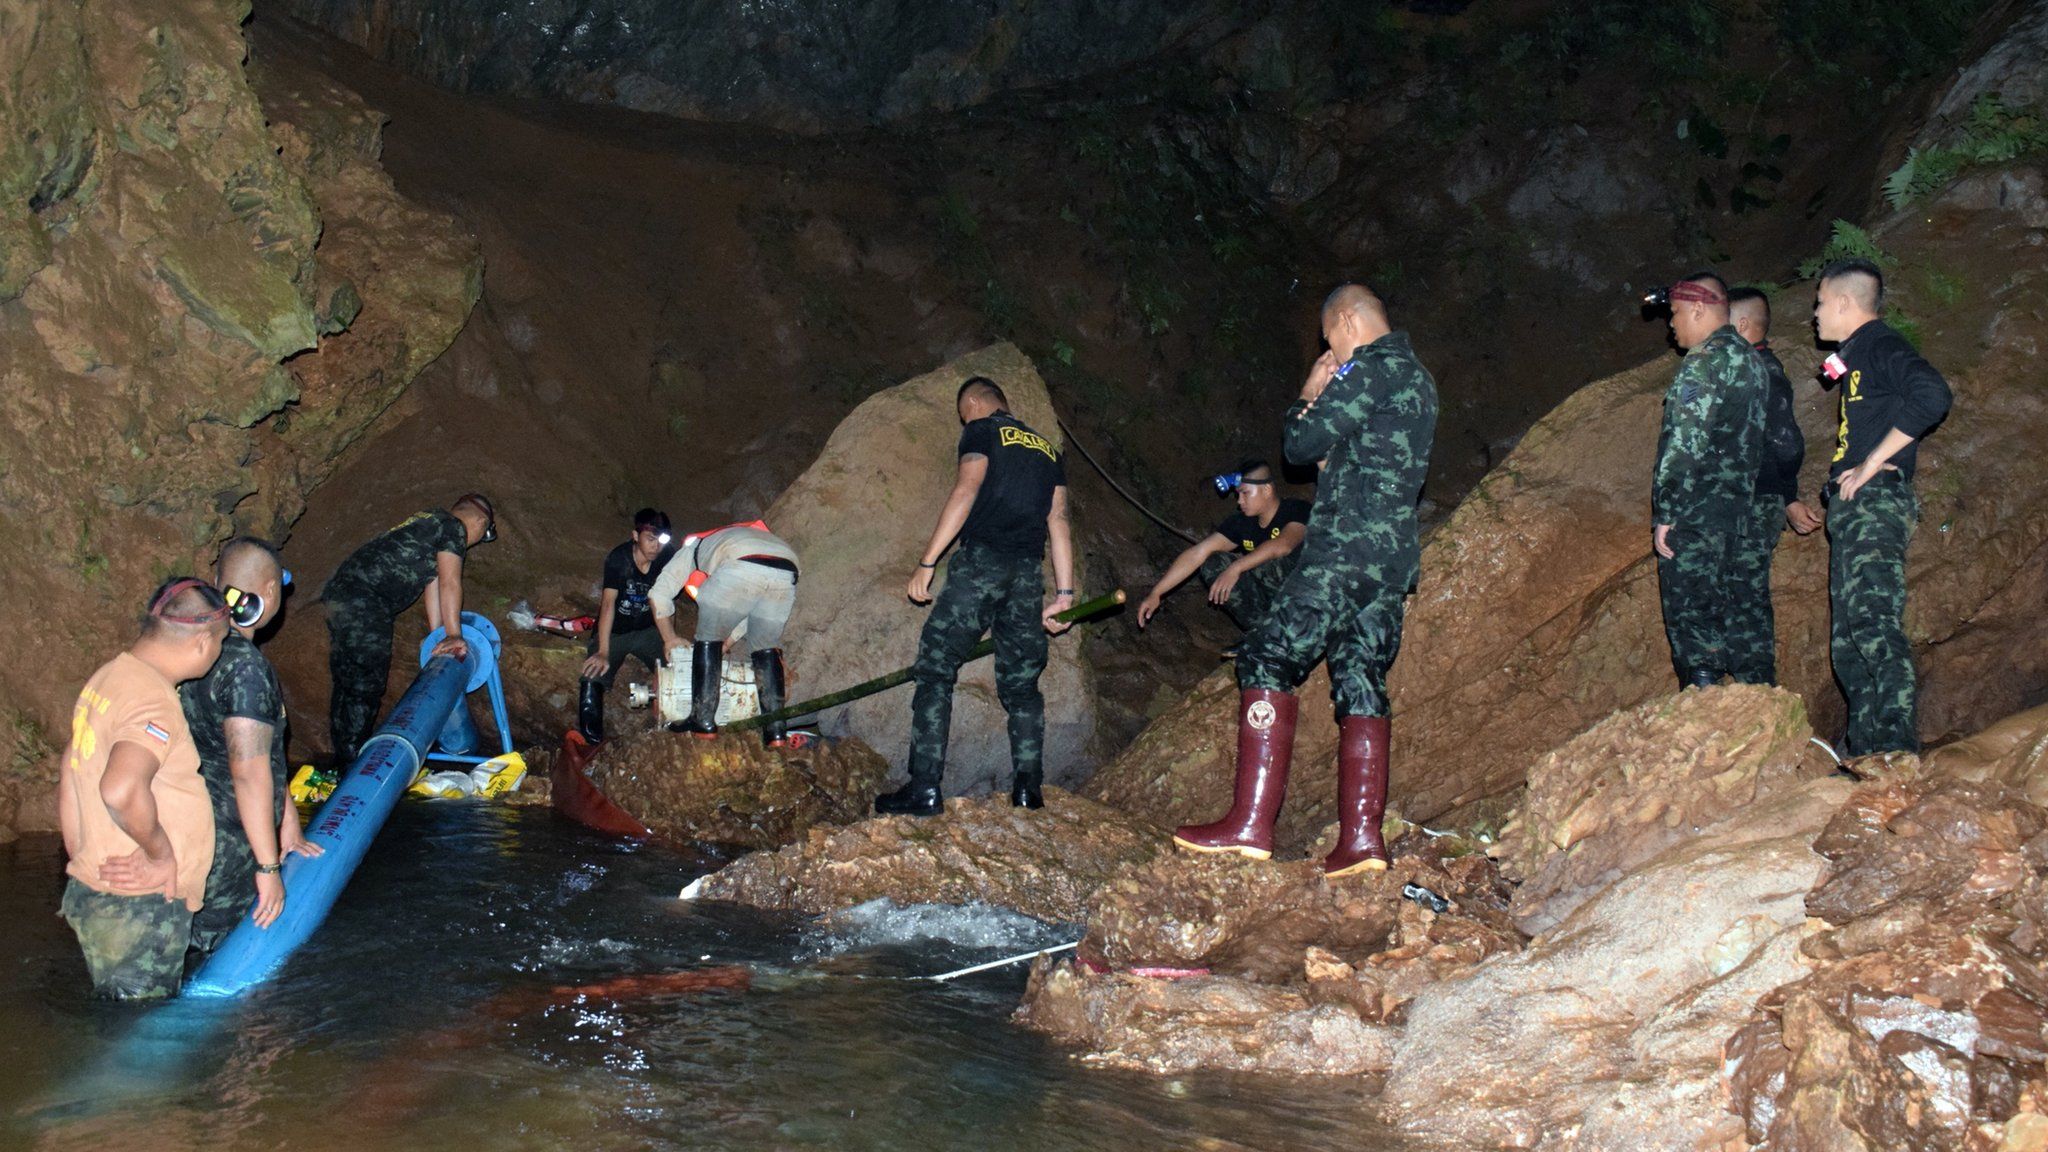 Thai soldiers pumping flooded water out of the cave complex during a rescue operation